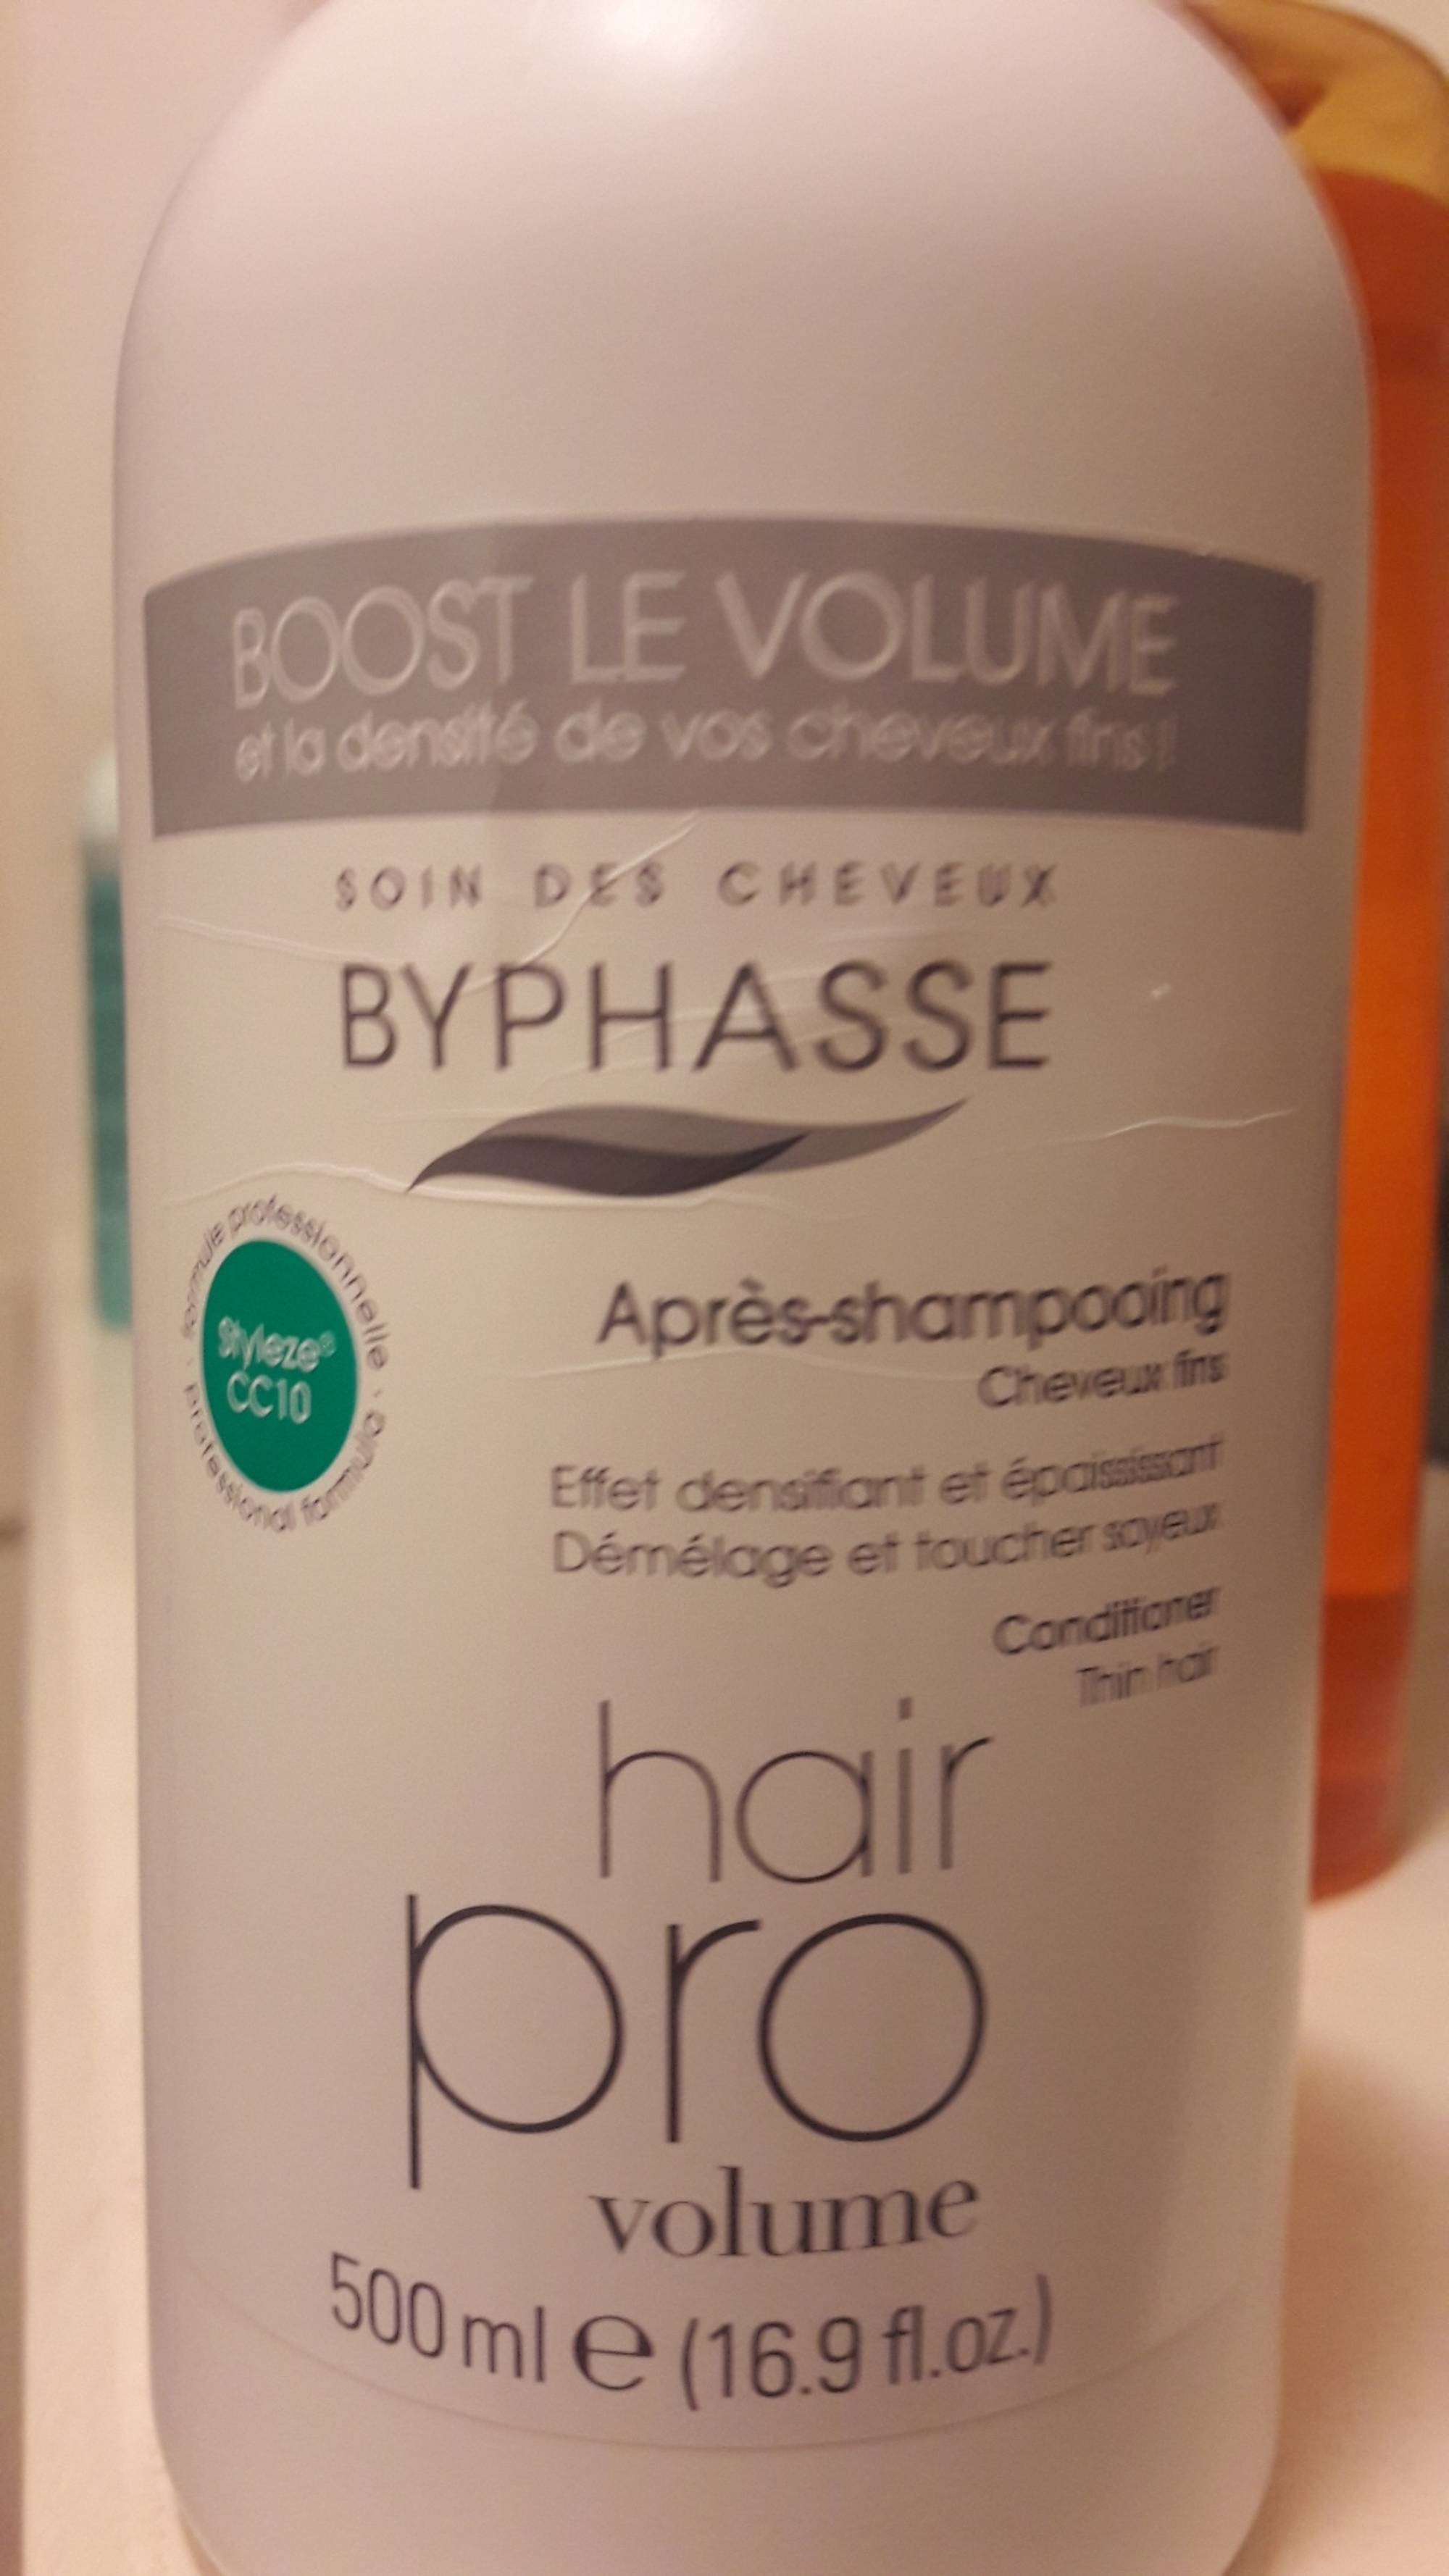 BYPHASSE - Hair pro volume - Après-shampooing